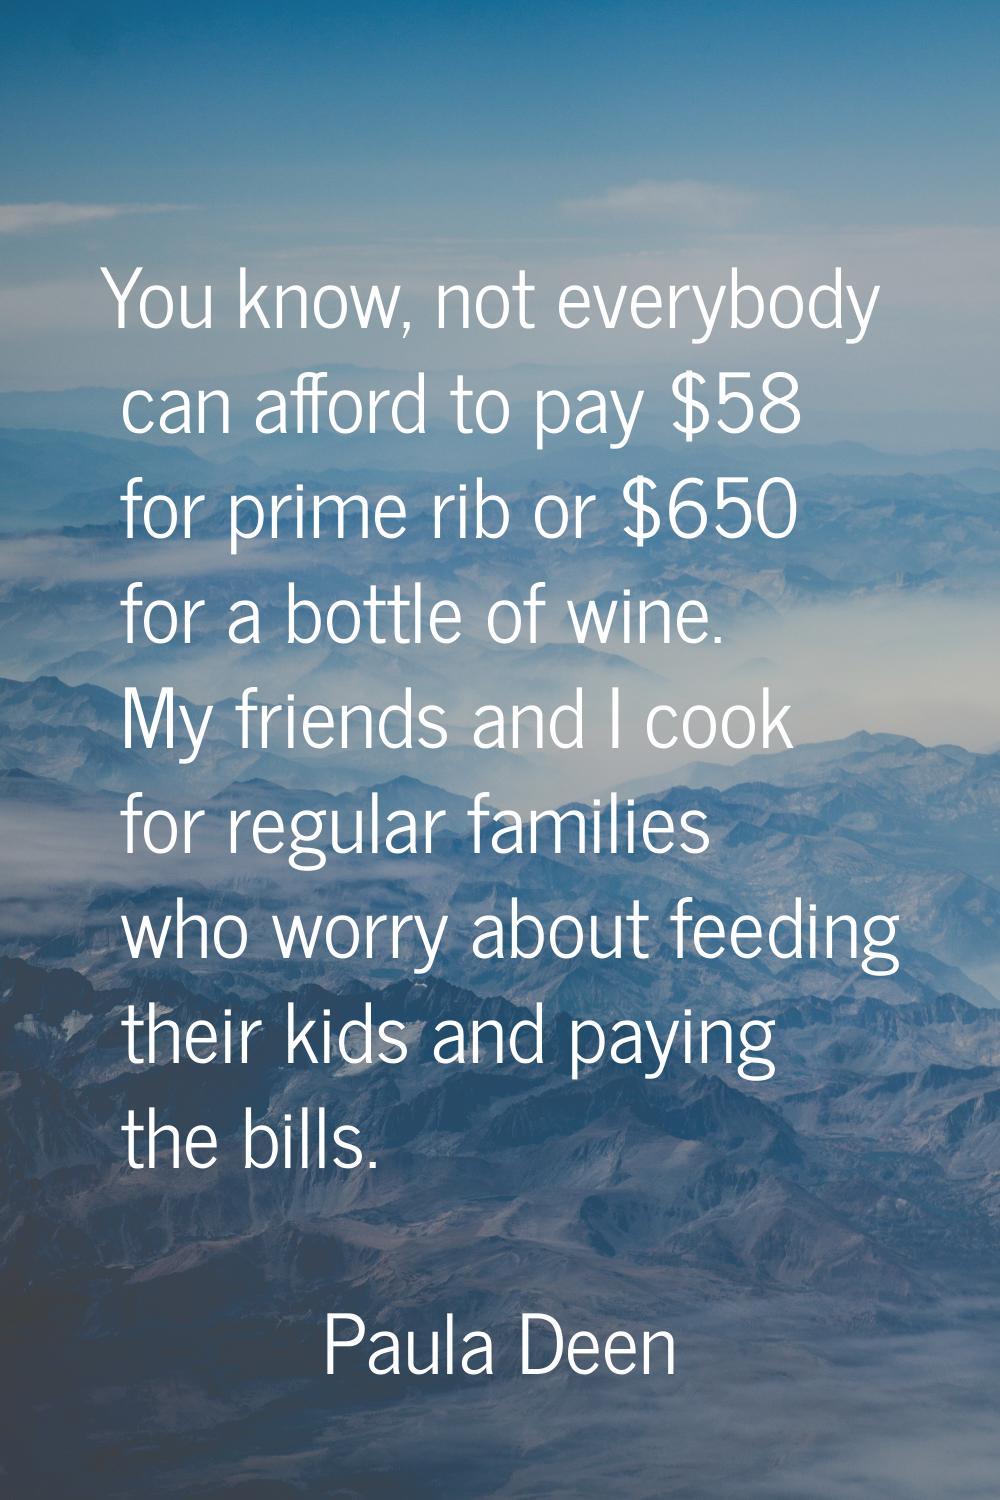 You know, not everybody can afford to pay $58 for prime rib or $650 for a bottle of wine. My friend